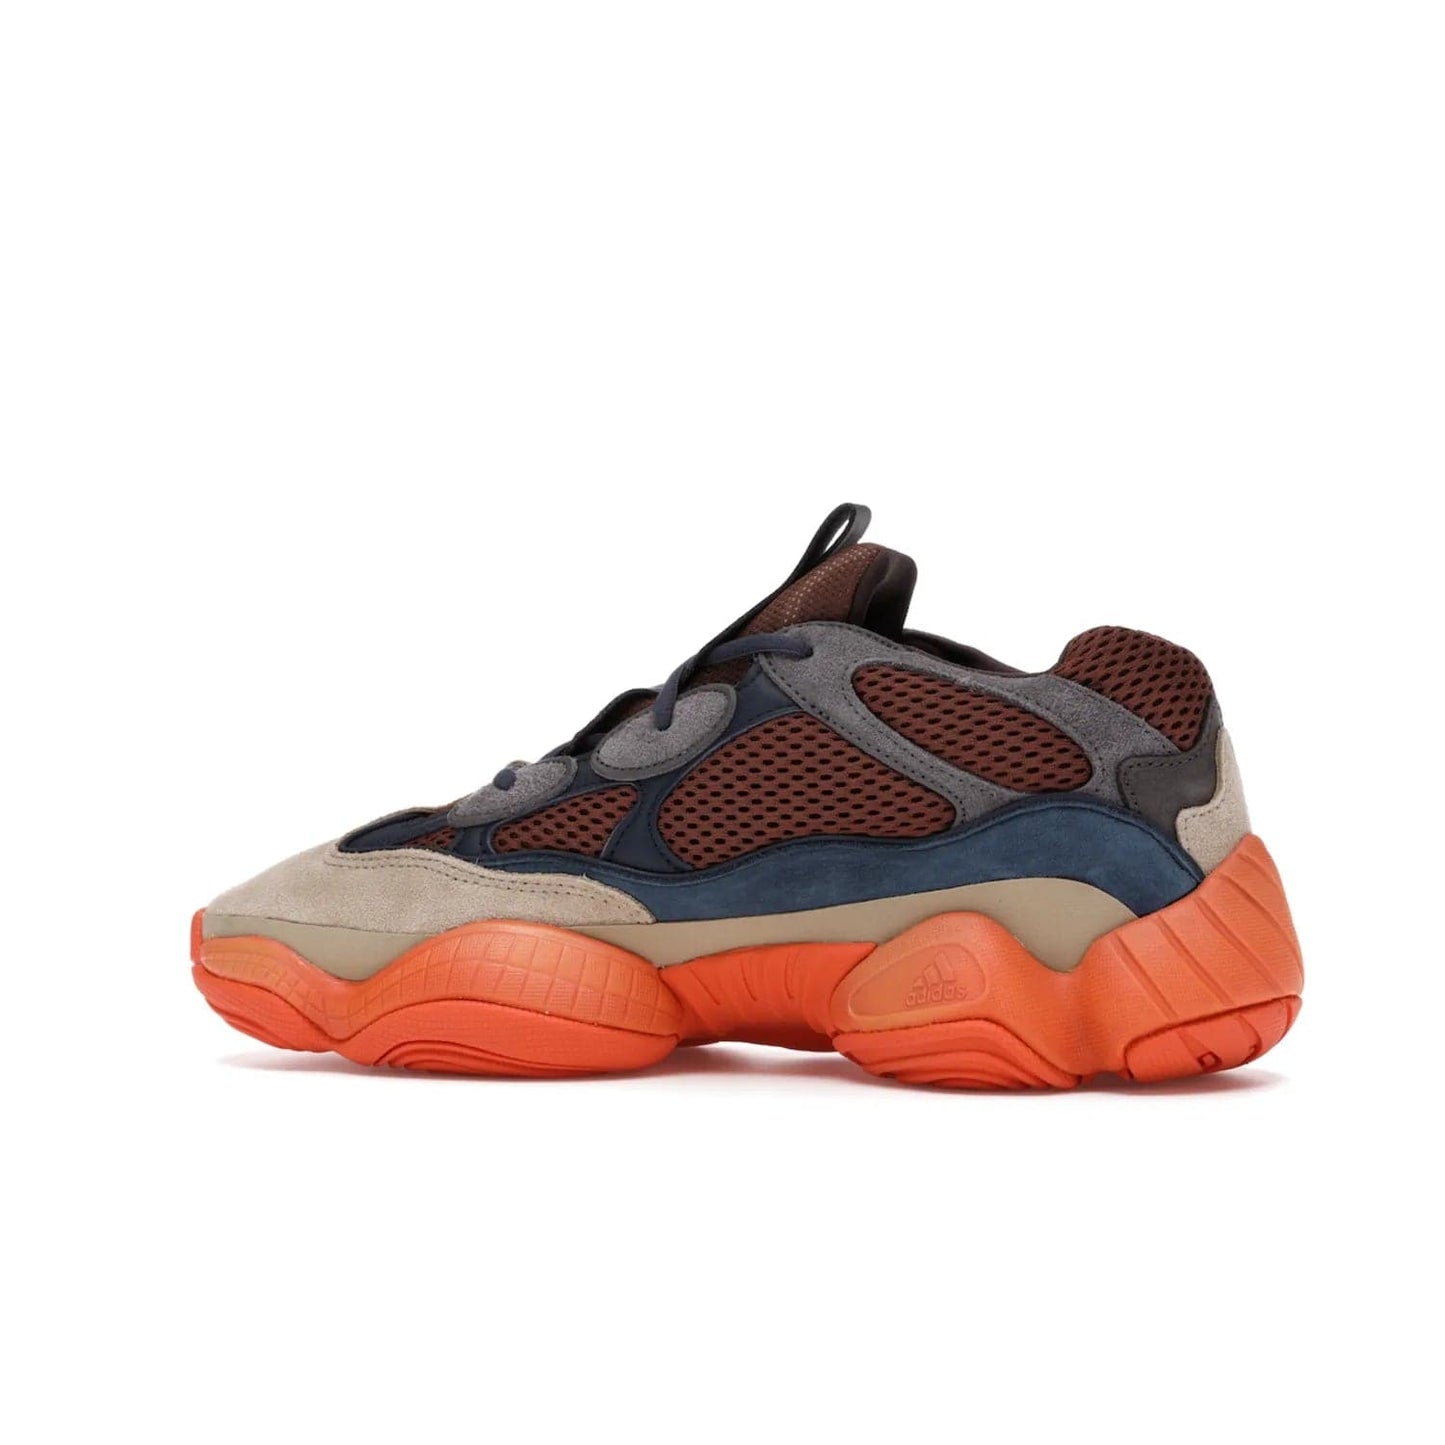 adidas Yeezy 500 Enflame - Image 21 - Only at www.BallersClubKickz.com - Step into style with the adidas Yeezy 500 Enflame. Mix of mesh, leather, and suede layered together to create tonal-brown, dark blue, & orange. Orange AdiPRENE sole provides superior cushioning & comfort. Get yours and experience maximum style.